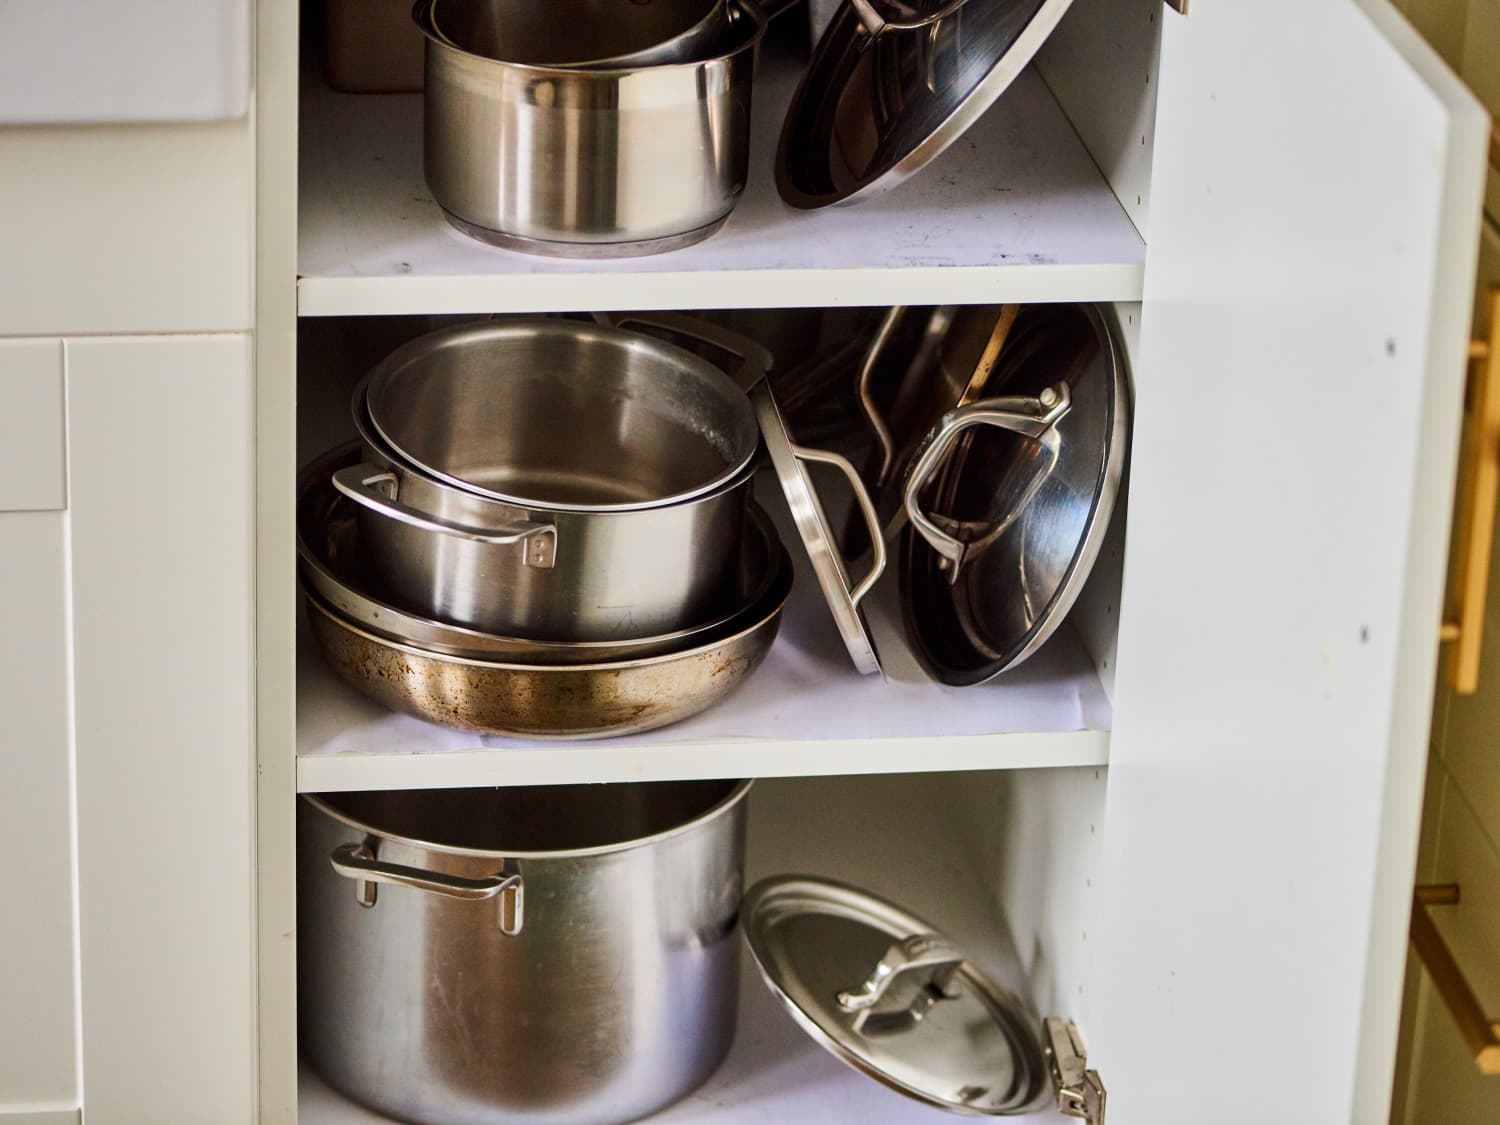 https://cdn.apartmenttherapy.info/image/upload/f_jpg,q_auto:eco,c_fill,g_auto,w_1500,ar_4:3/k%2FPhoto%2FLifestyle%2F2019-08-storing-lids-pots-pans%2F6-Amazon-Find-Can-Make-Storing-the-Lids-to-Your-Pots-and-Pans-a-Million-Times-Easier_073